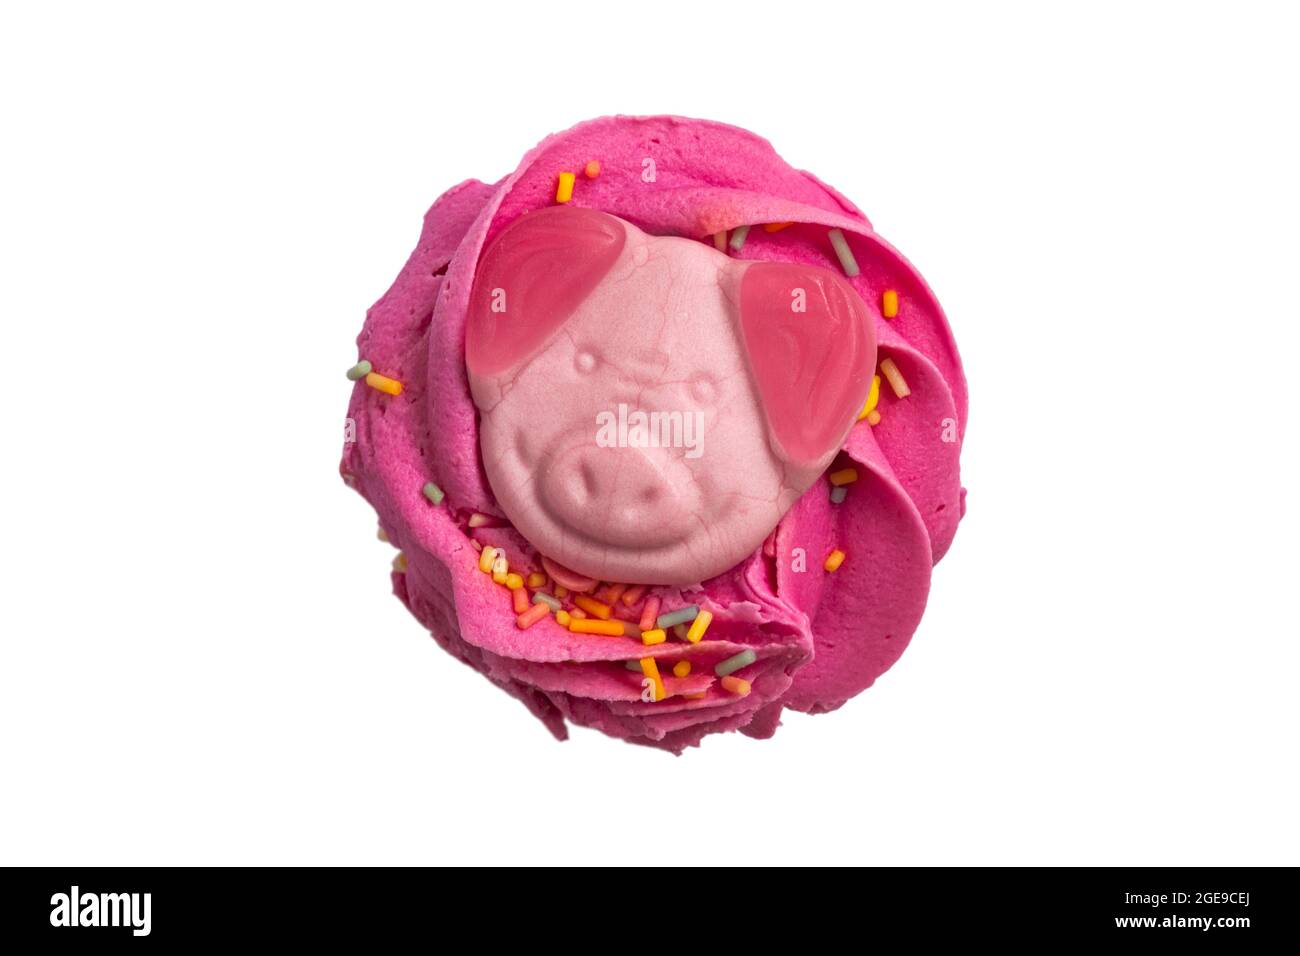 Percy Pig party cupcake cake from M&S isolated on white background Stock Photo